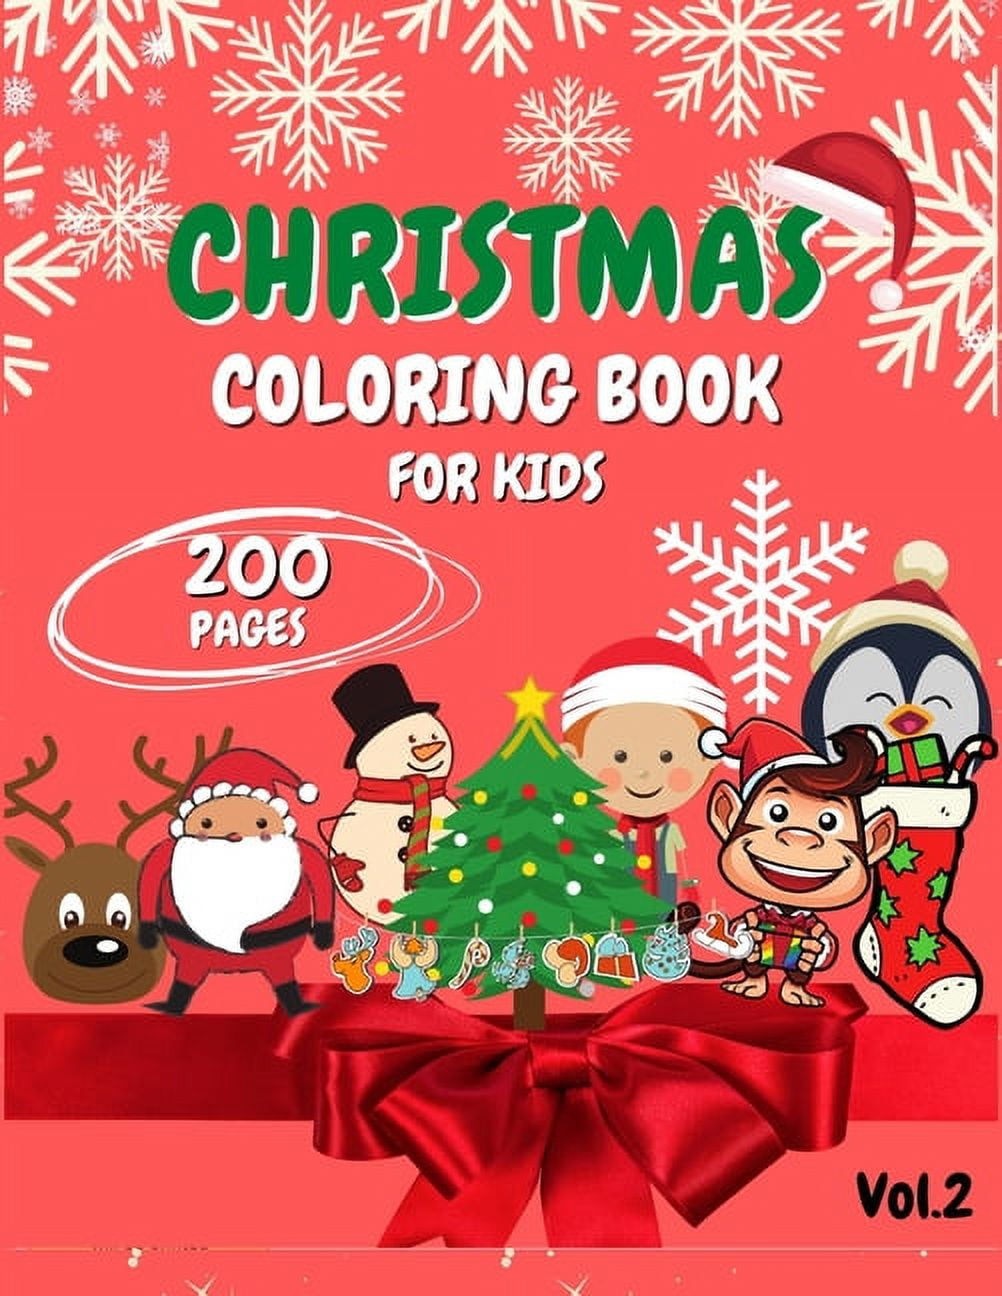 Coloring Books For Adults: Children Coloring and Activity Books for Kids  Ages 2-4, 4-8, Boys, Girls, Christmas Ideals (Woodland Animals #6)  (Paperback)